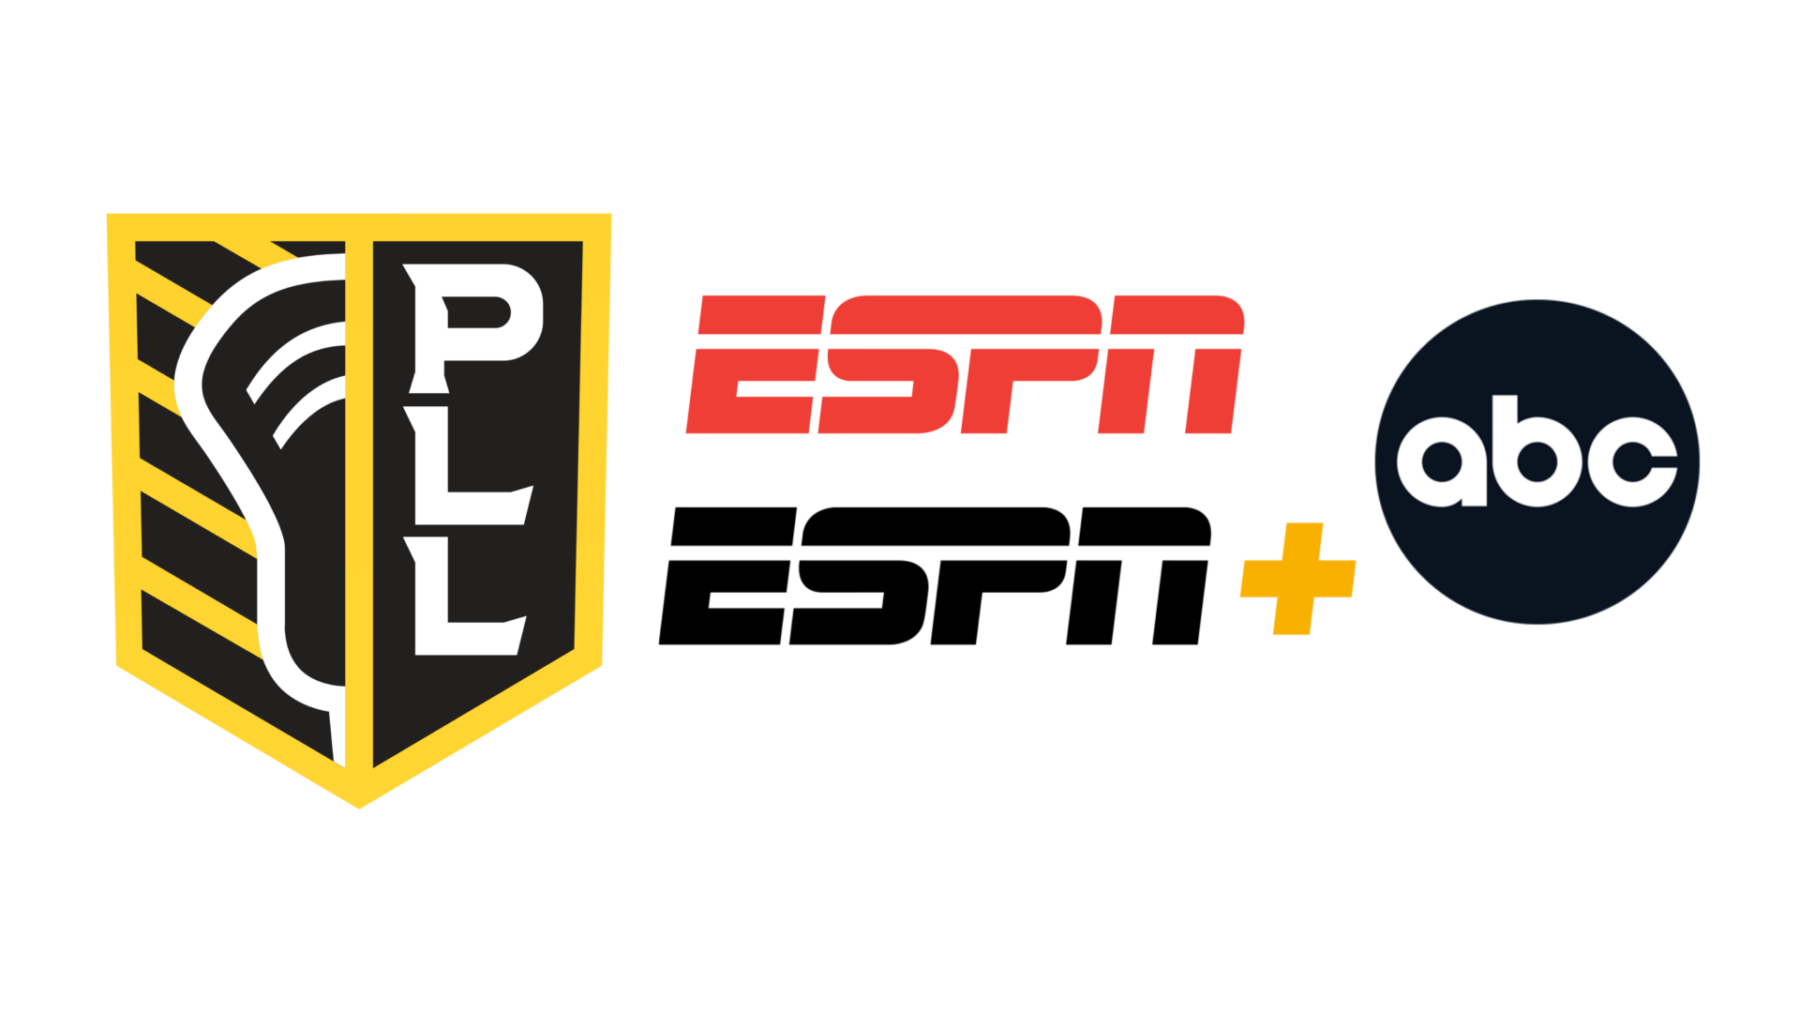 What content is on ESPN Plus in 2023?